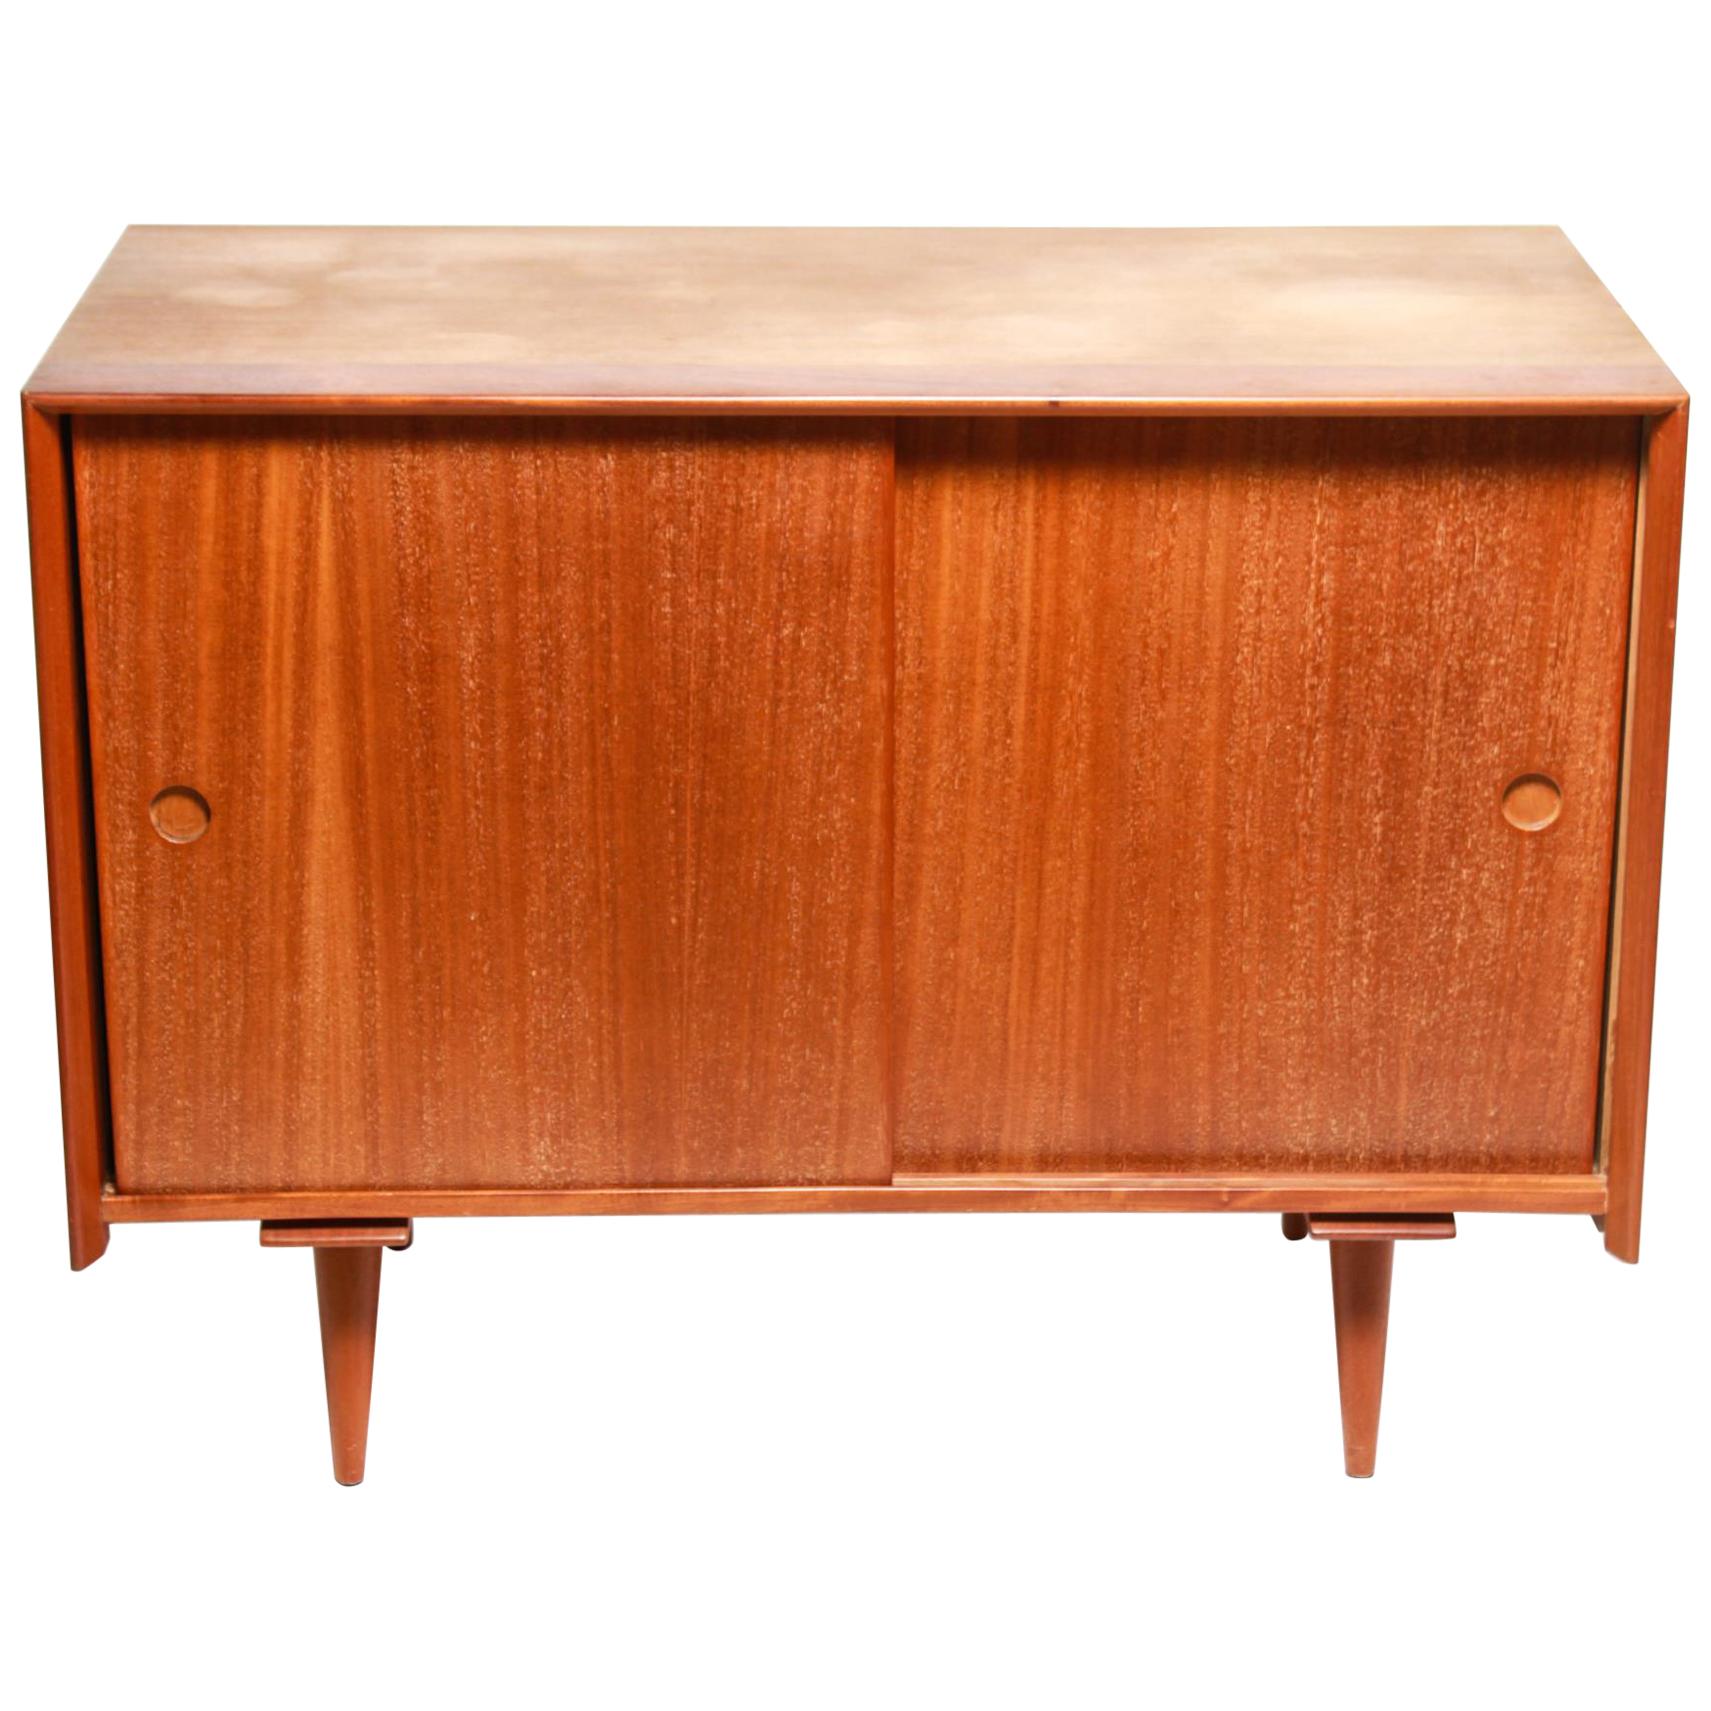 Jens Risom Mid-Century Modern Credenza or Cabinet